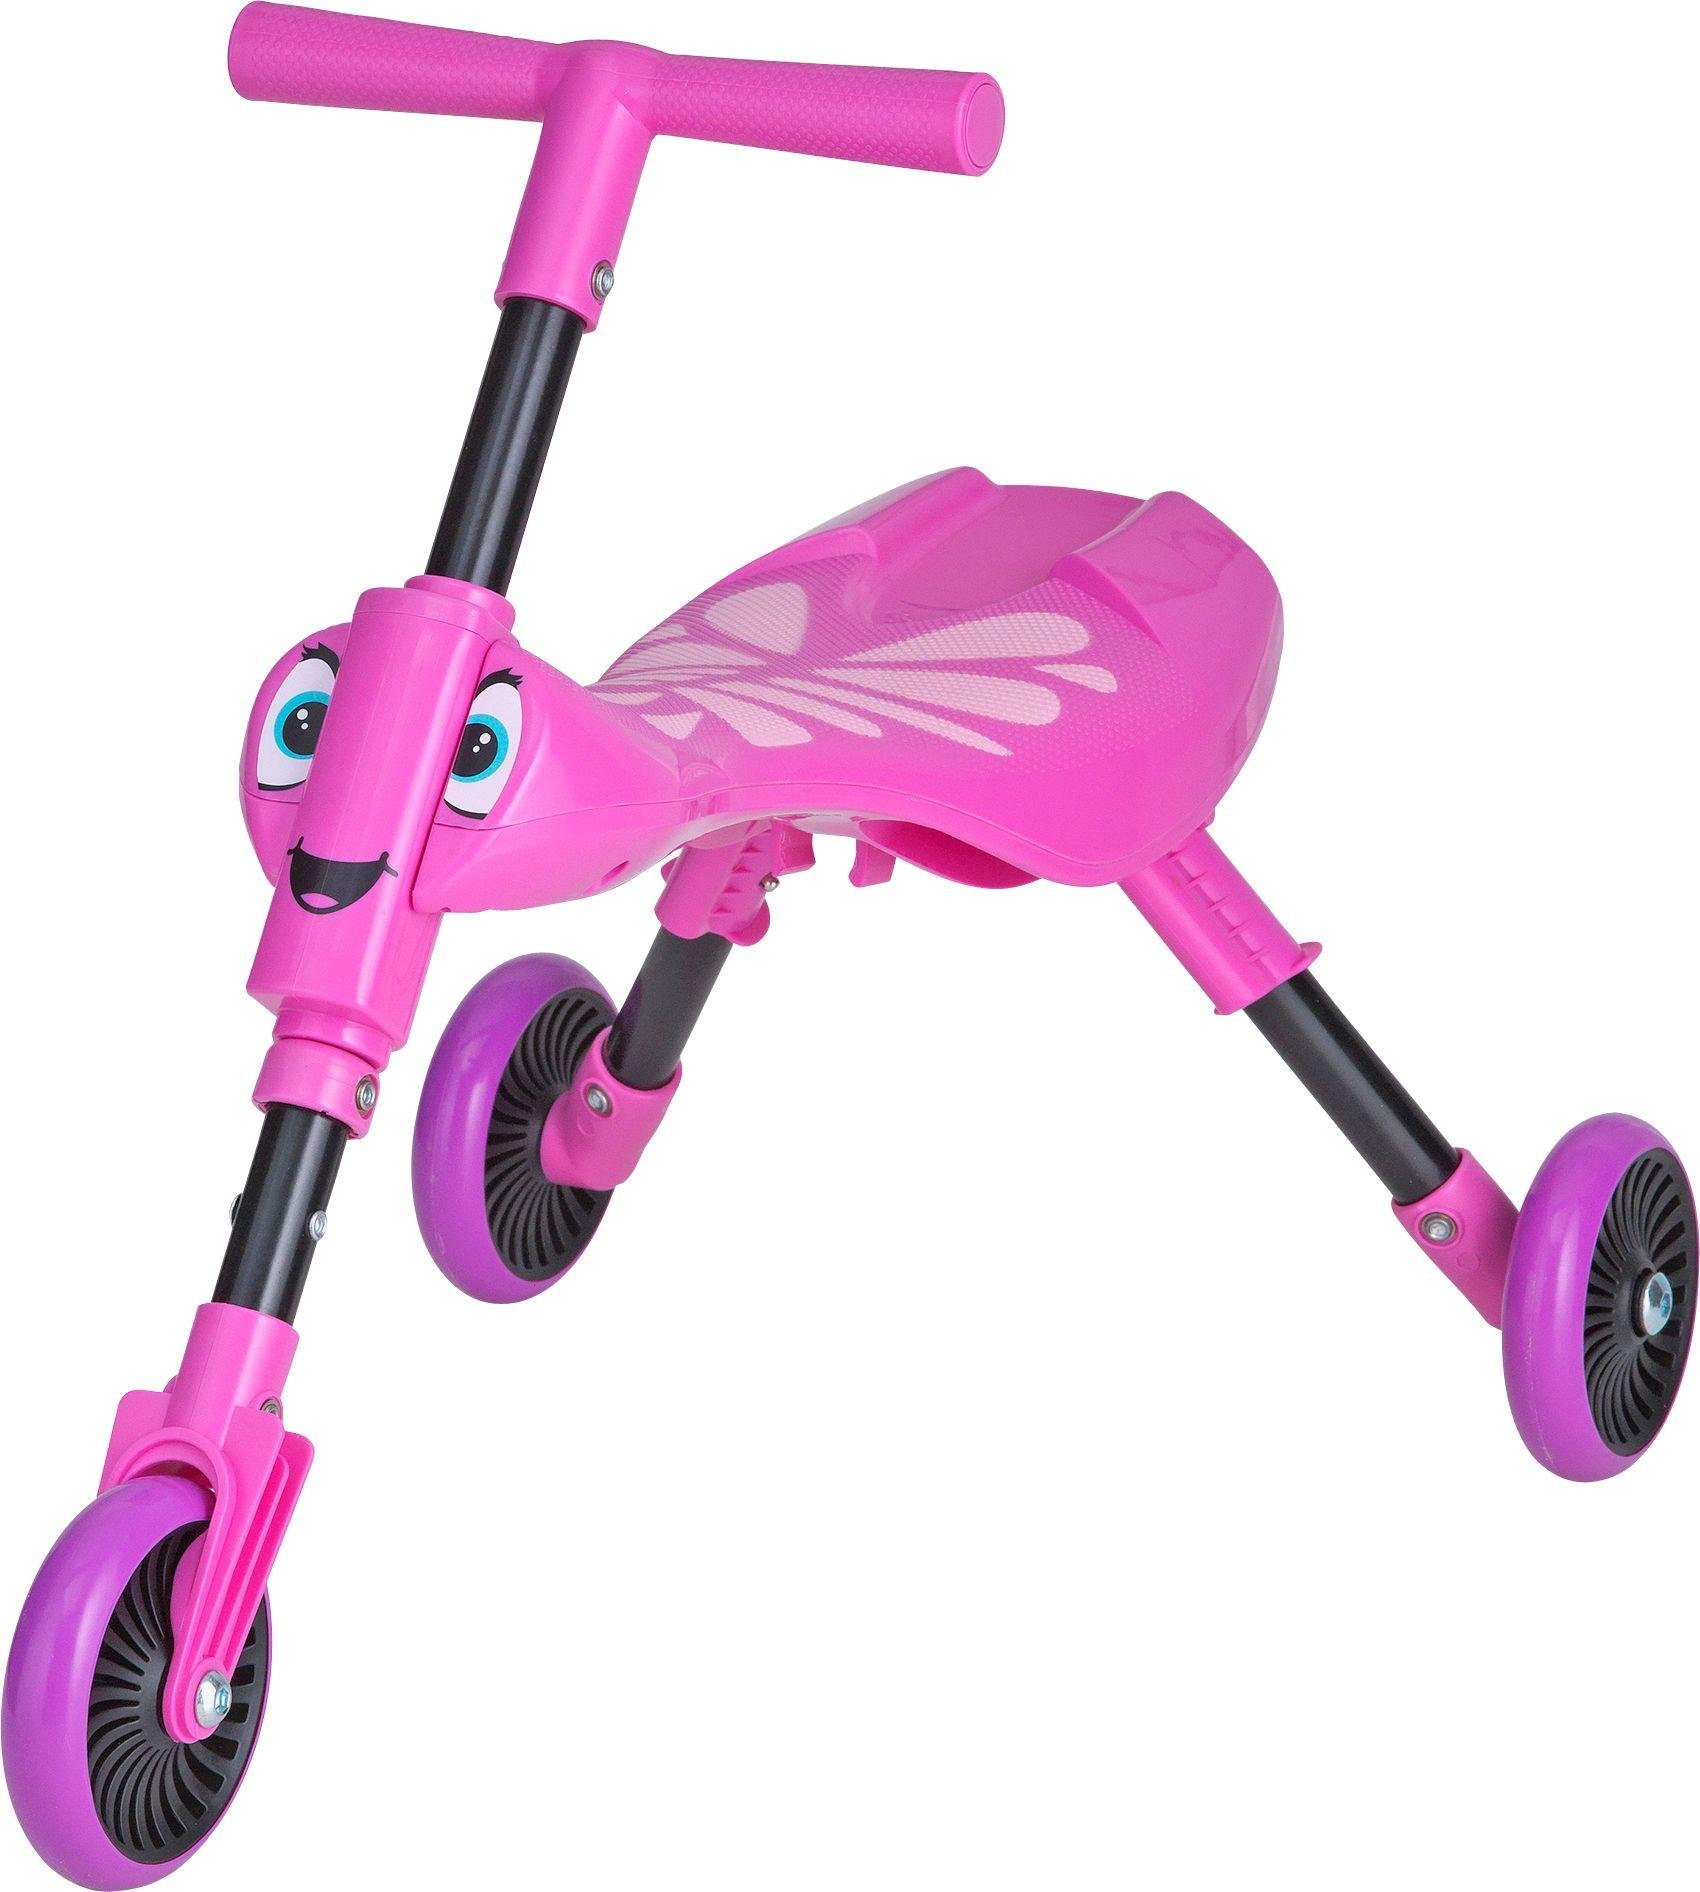 Scuttlebug Butterfly Ride On Review